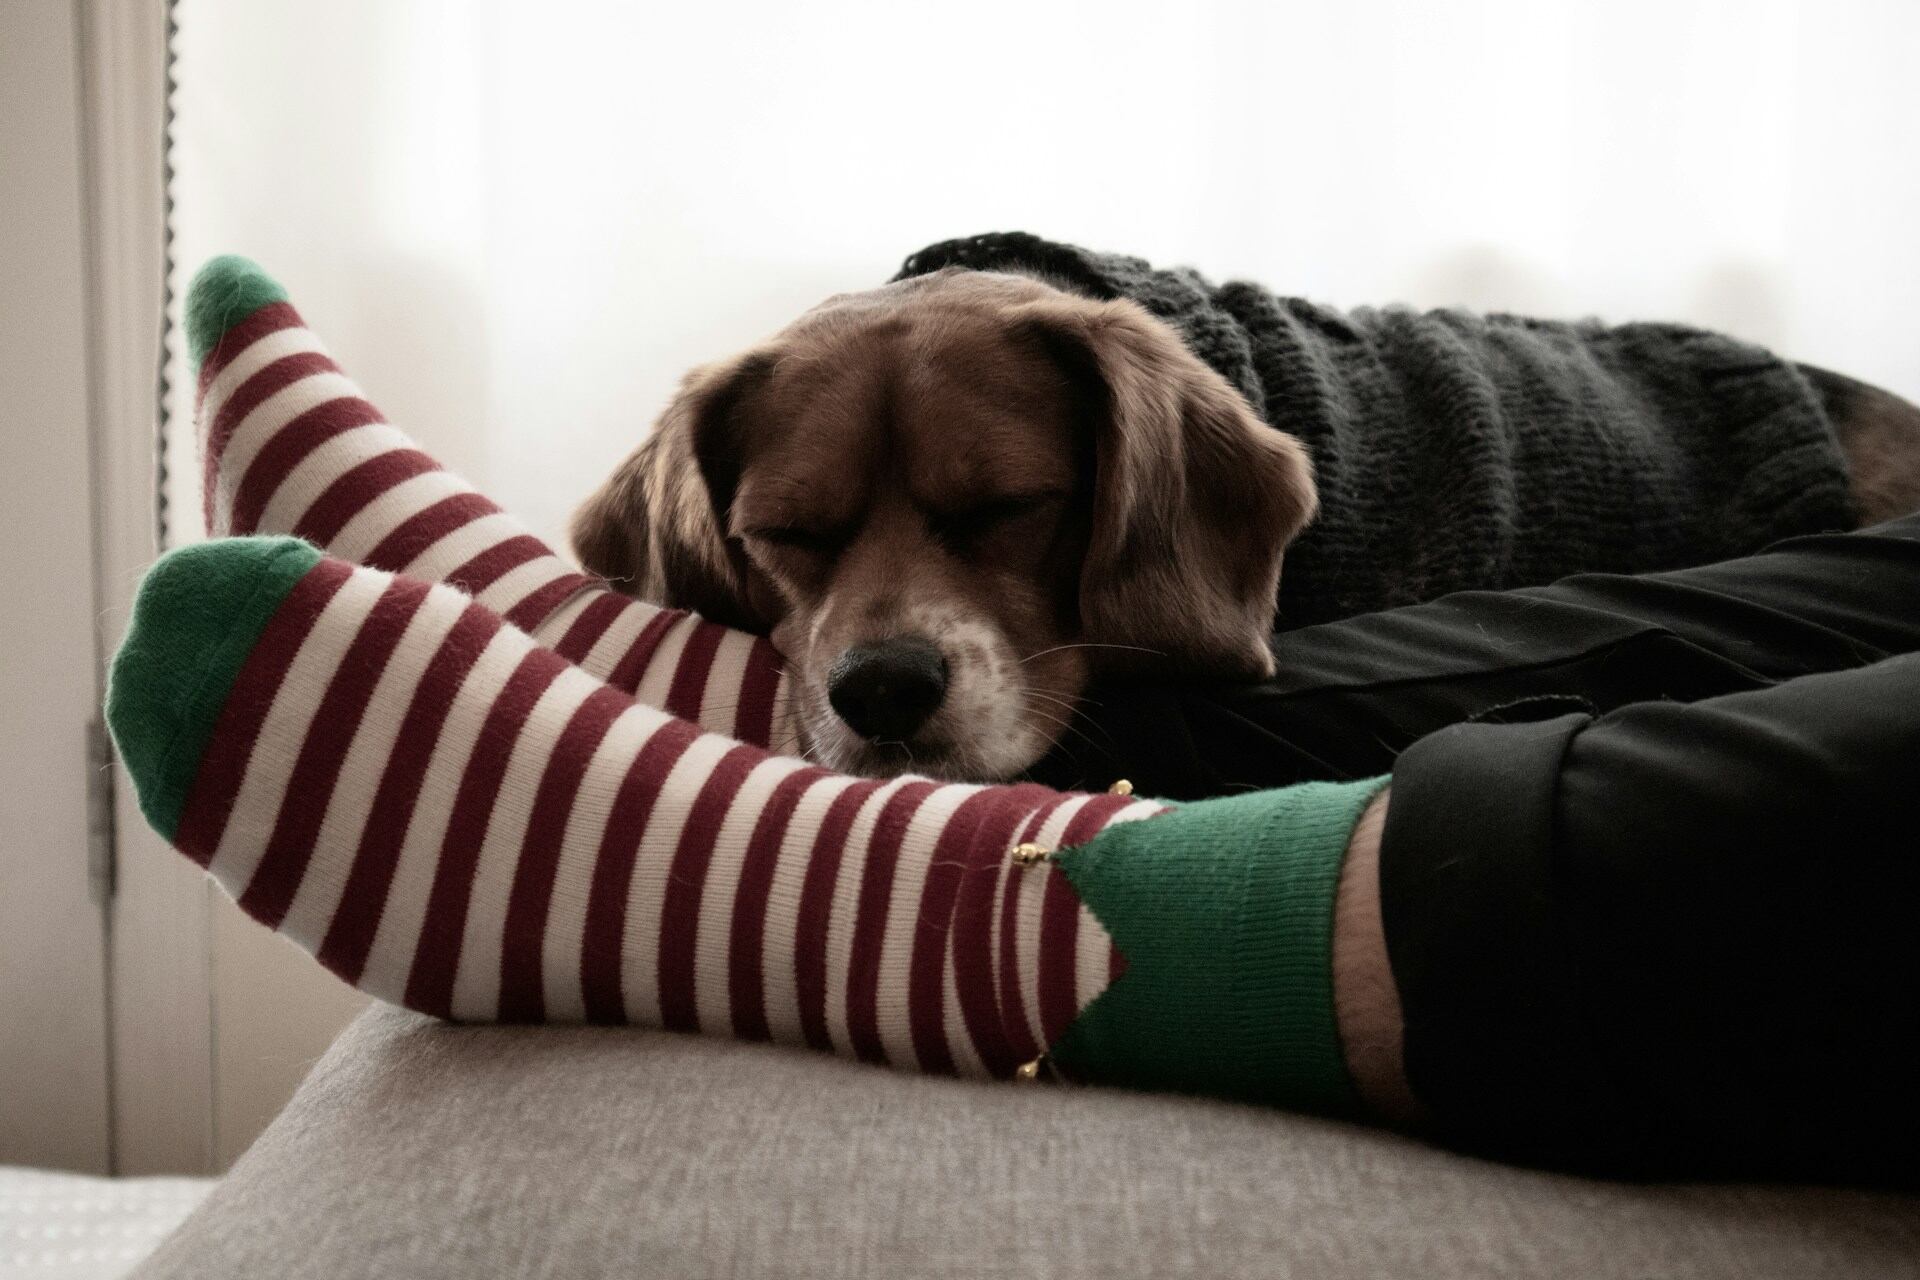 A puppy sleeping next to a person wearing striped socks